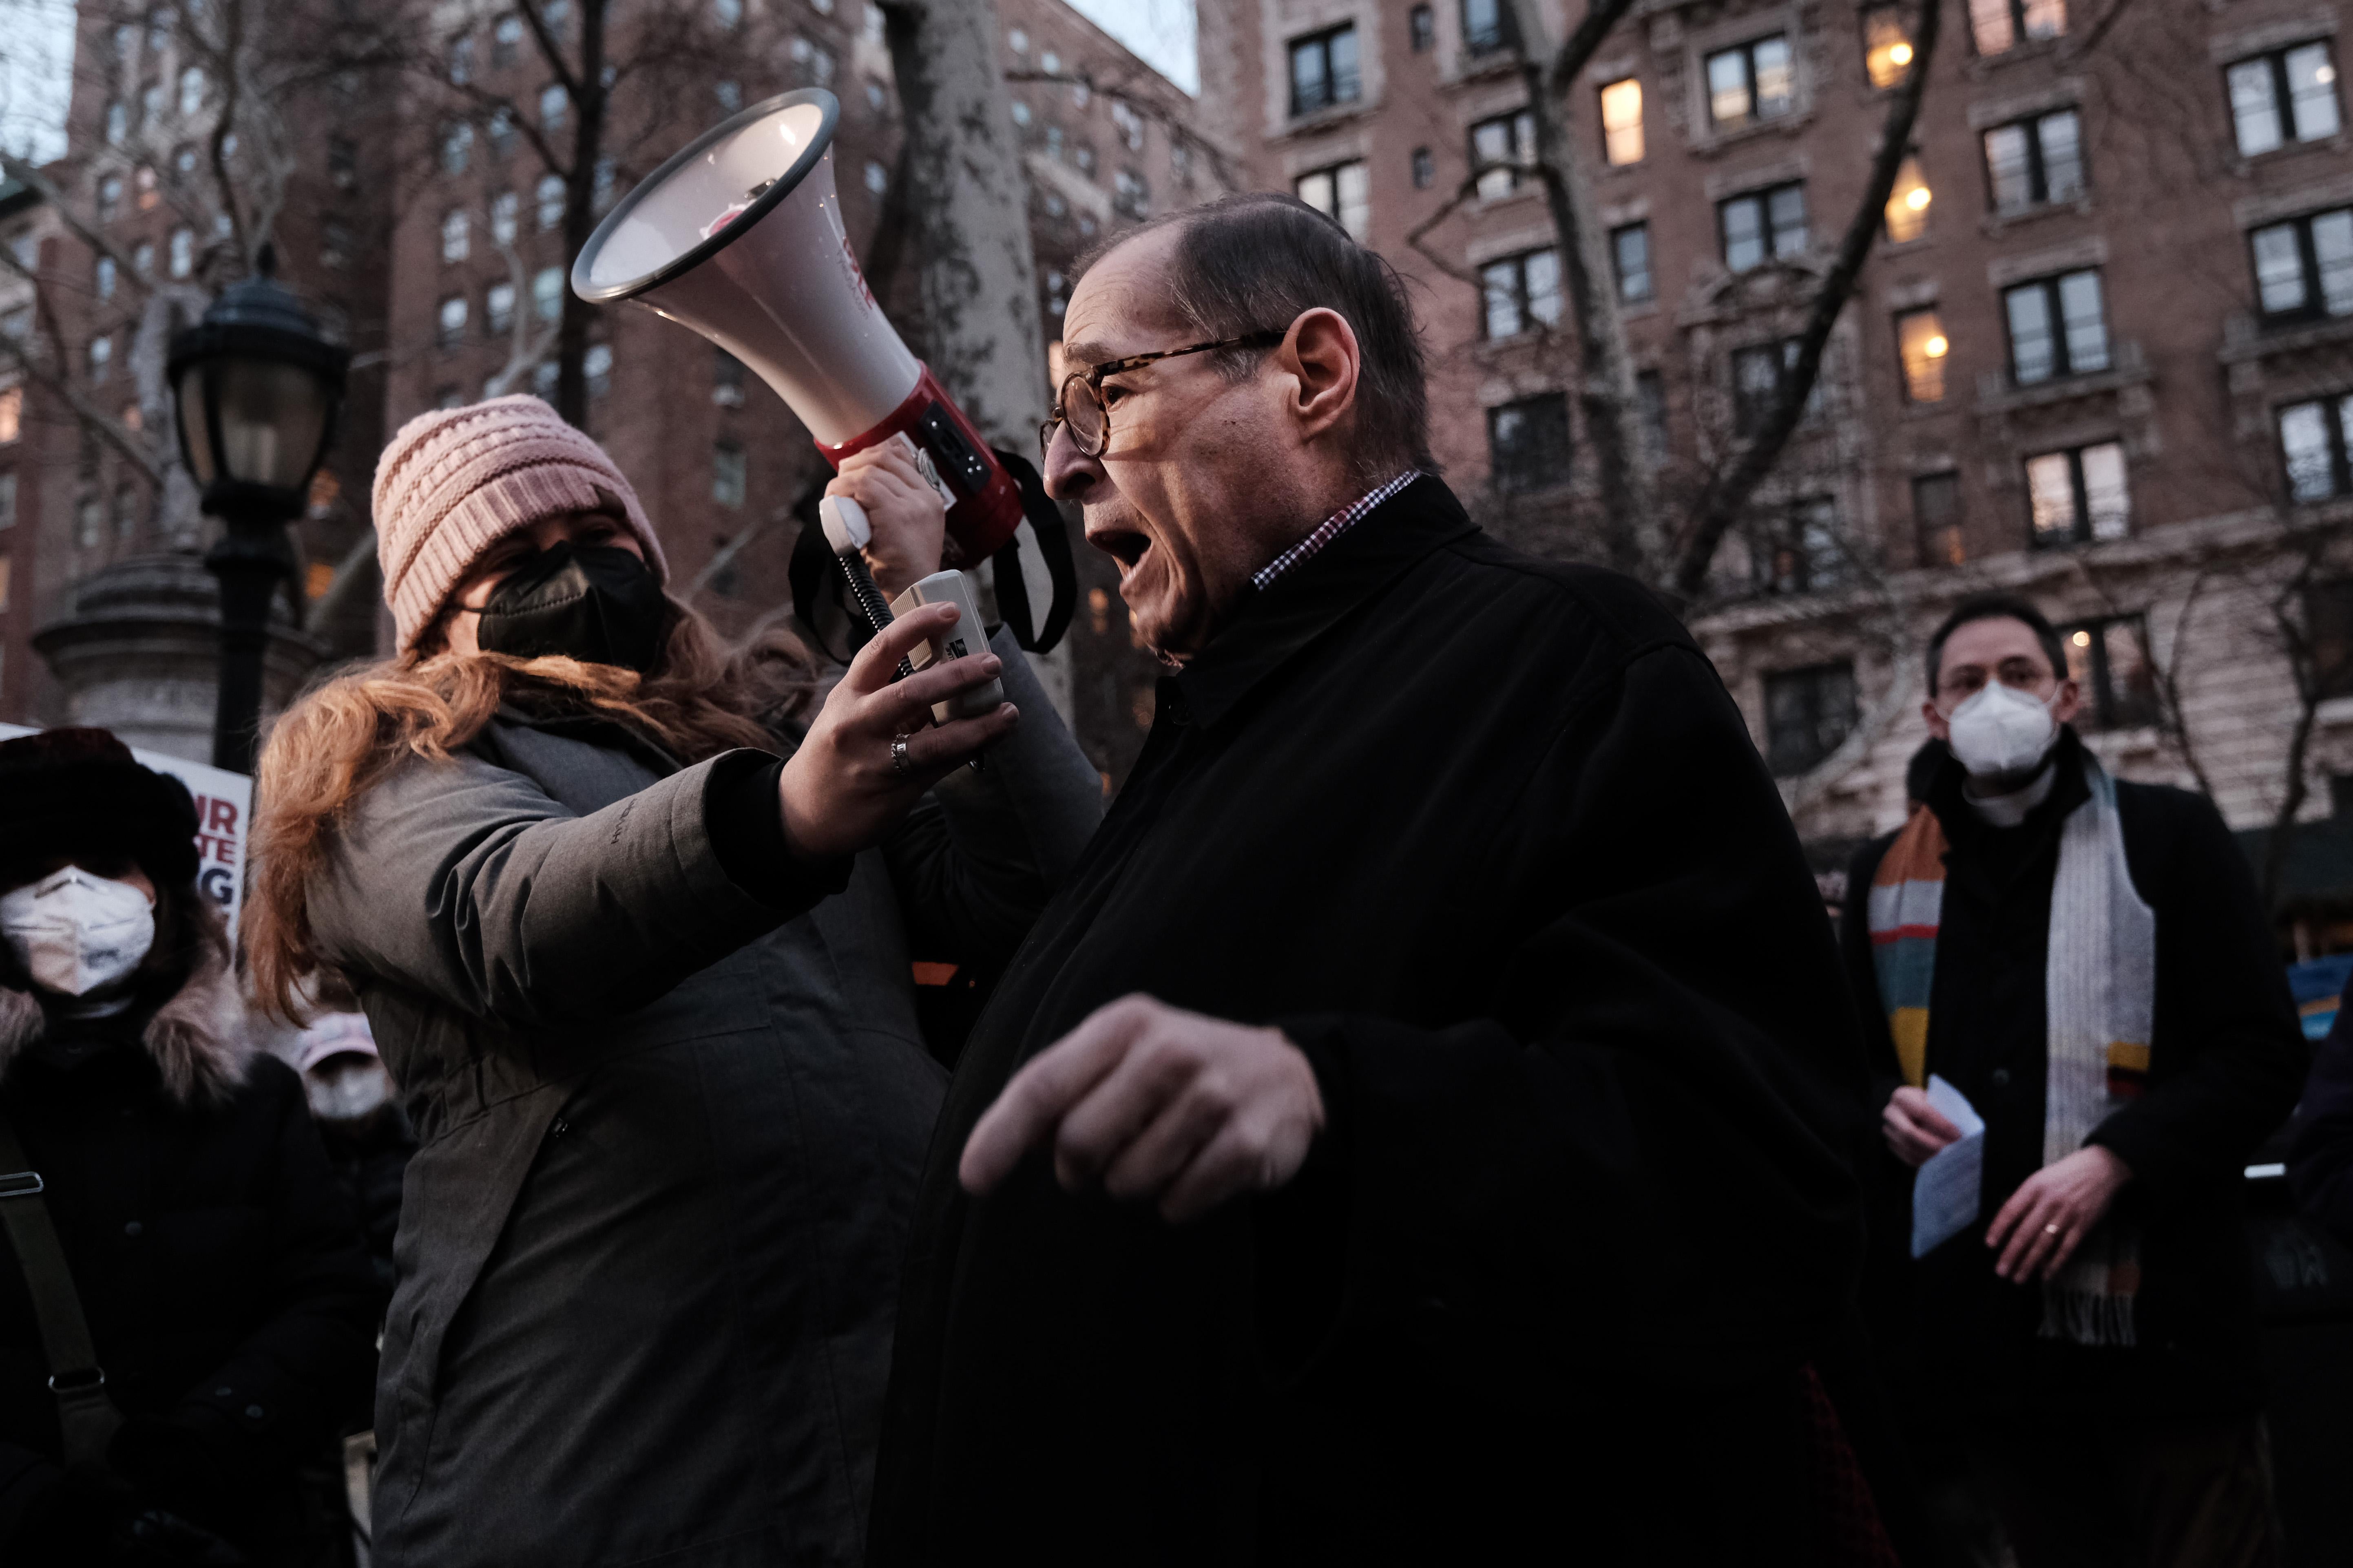 Nadler speaks into a bullhorn being held by someone else, who is wearing a mask.